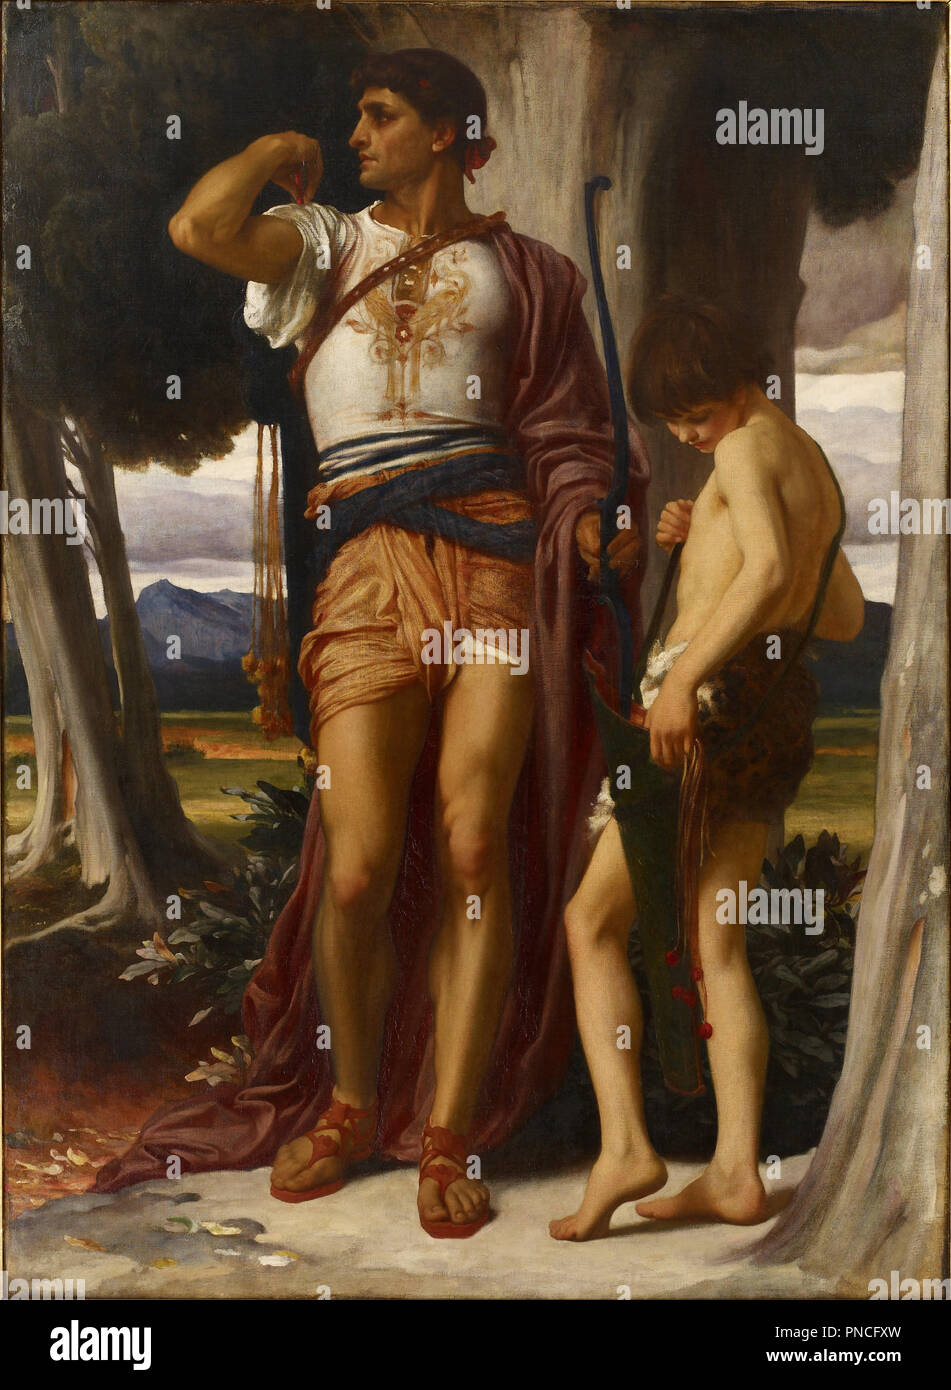 Jonathan token to David. Date/Period: Ca. 1868. Painting. Oil on canvas. Height: 171.4 cm (67.5 in); Width: 124.4 cm (49 in). Author: Frederic Leighton, 1st Baron Leighton. Stock Photo